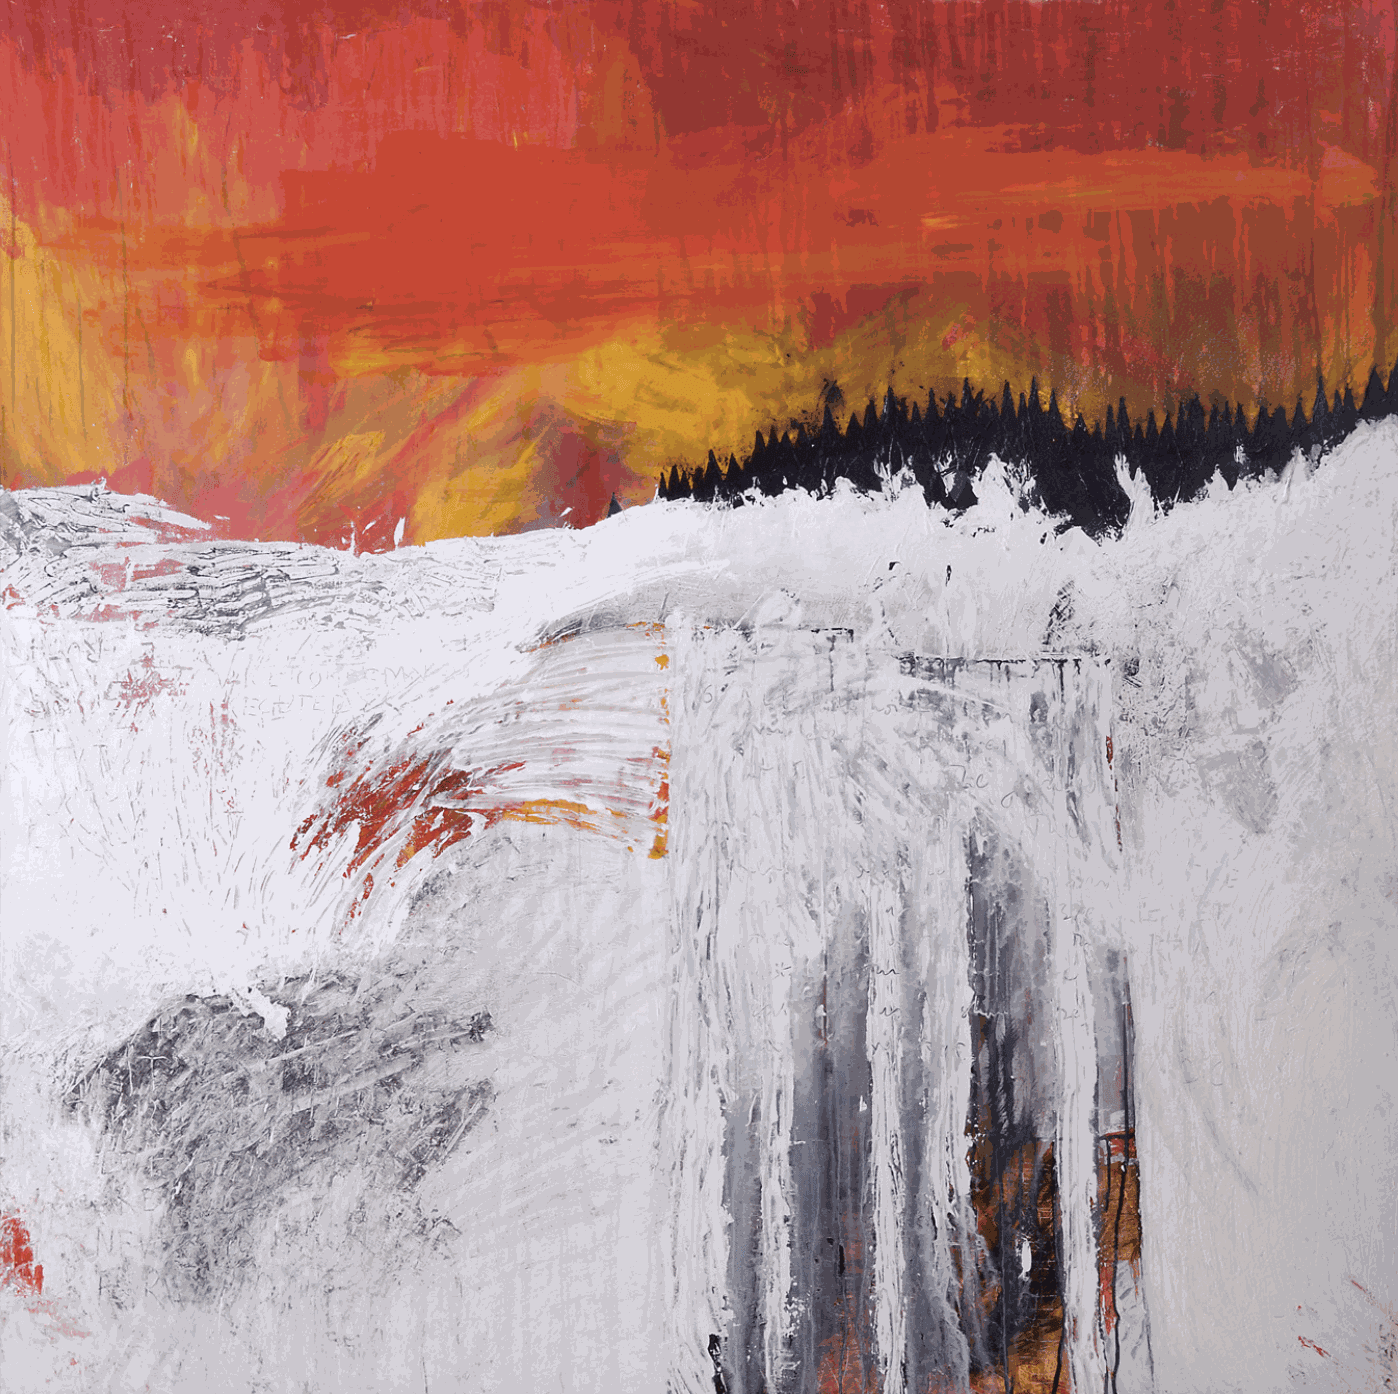 How to disappear completely: Stanley Donwood x Thom Yorke